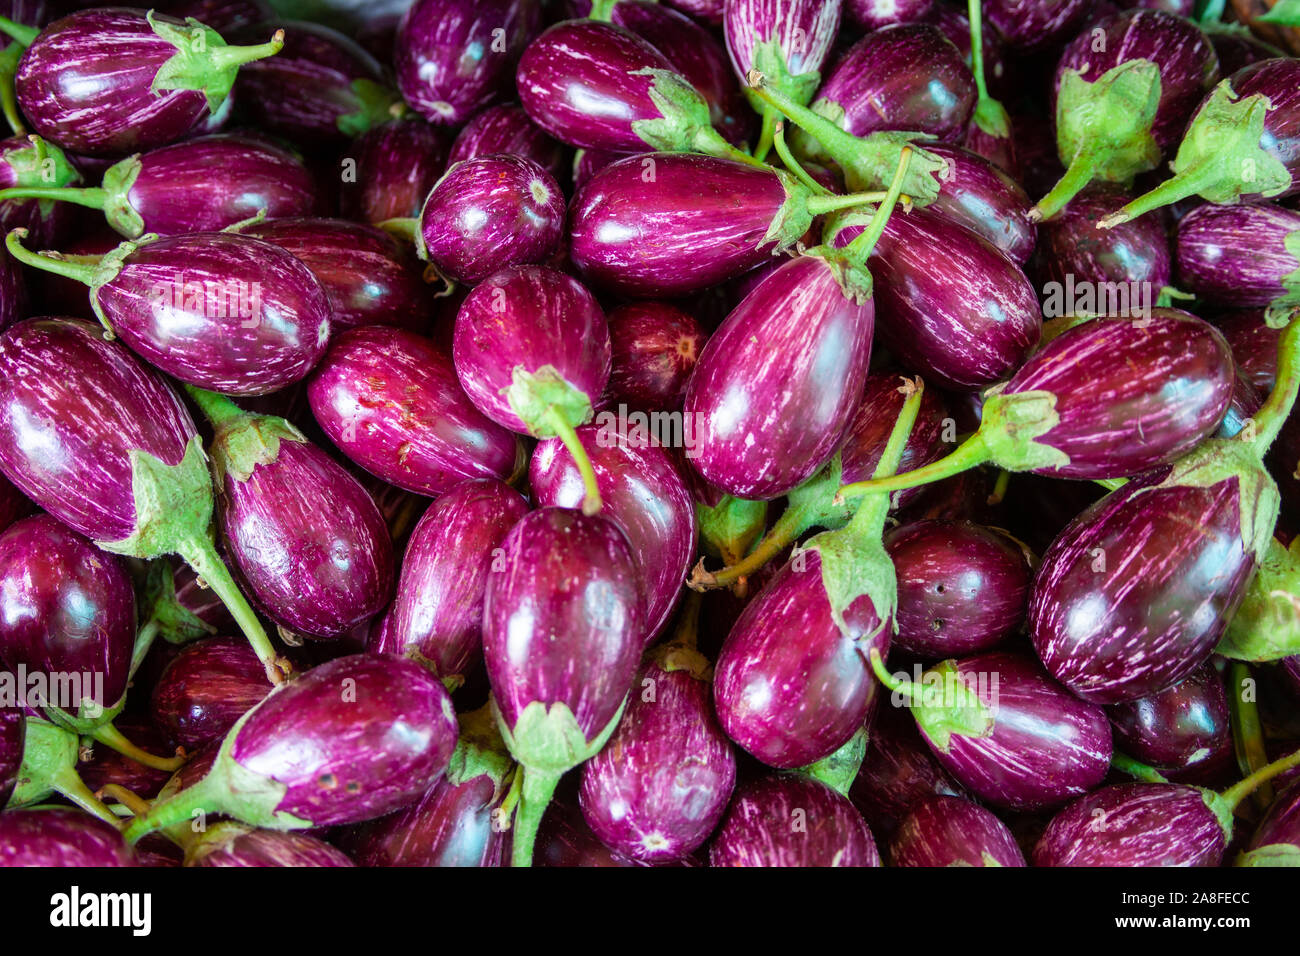 Egg plants beeing presented on the market. Sometimes they are displayed in baskets sometimes they are stacked. Lovely colors on these plants. Stock Photo